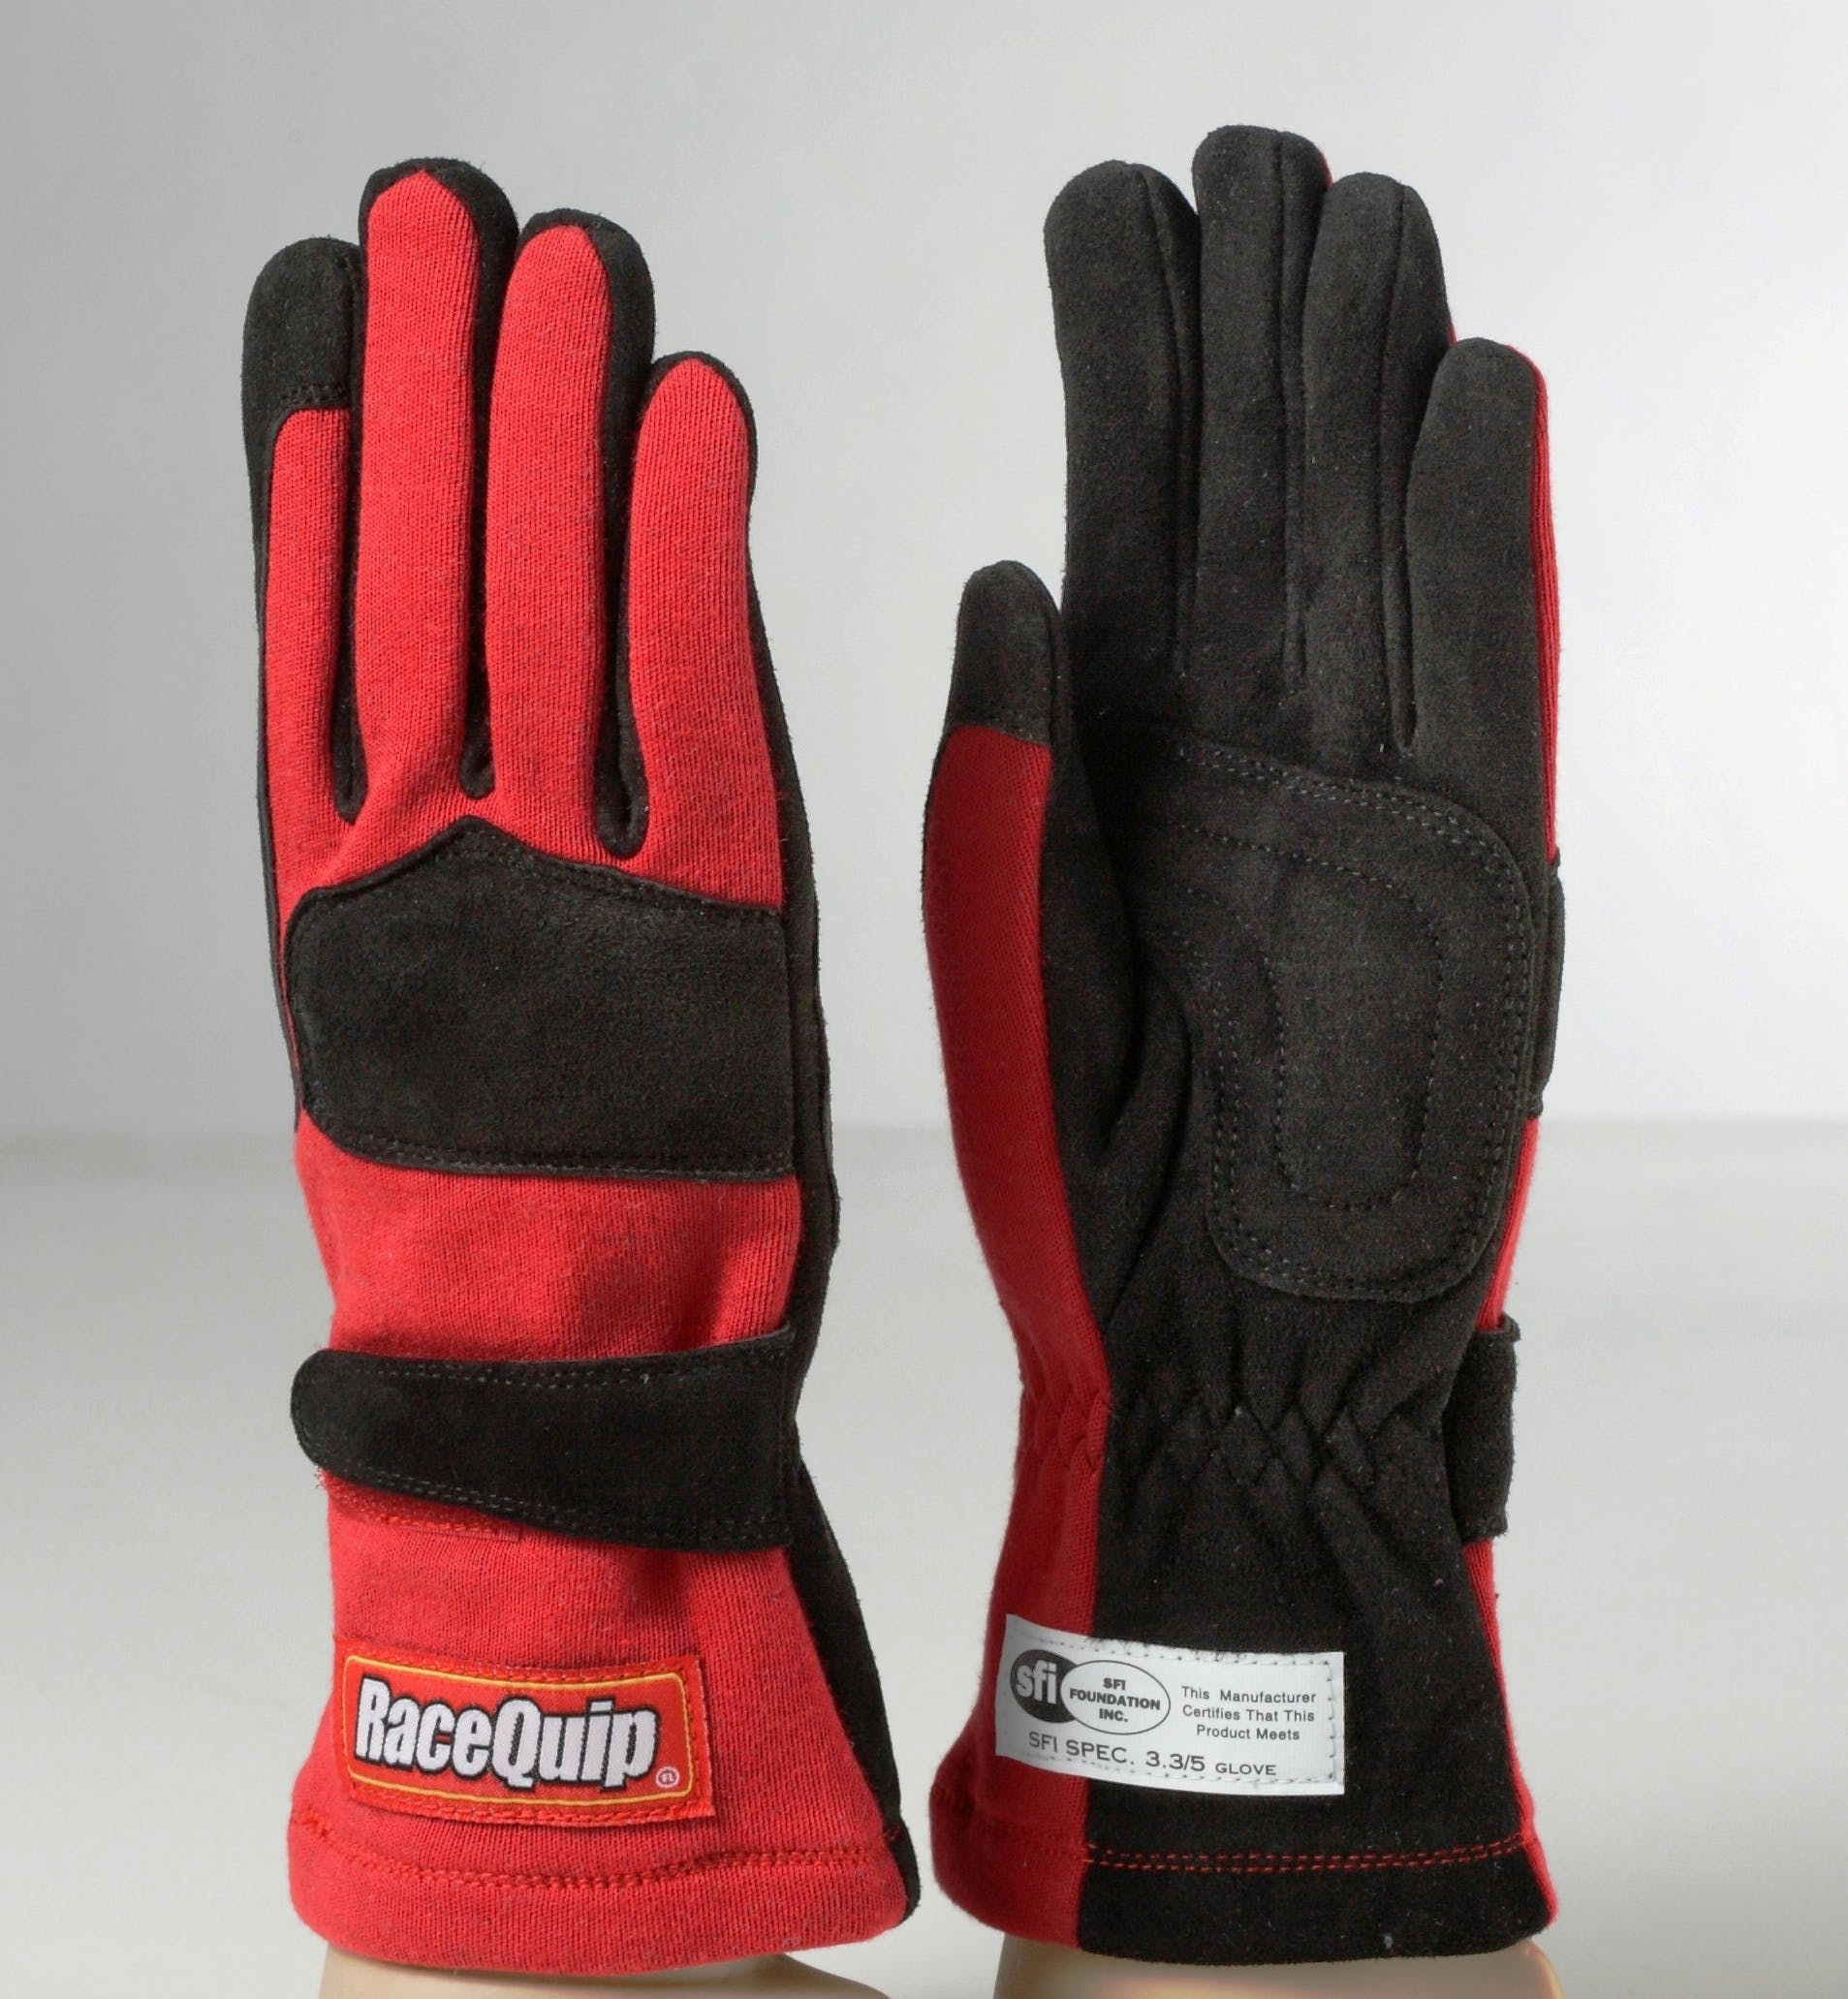 RaceQuip 355016 SFI-5 Double-Layer Racing Gloves (Red, X-Large)